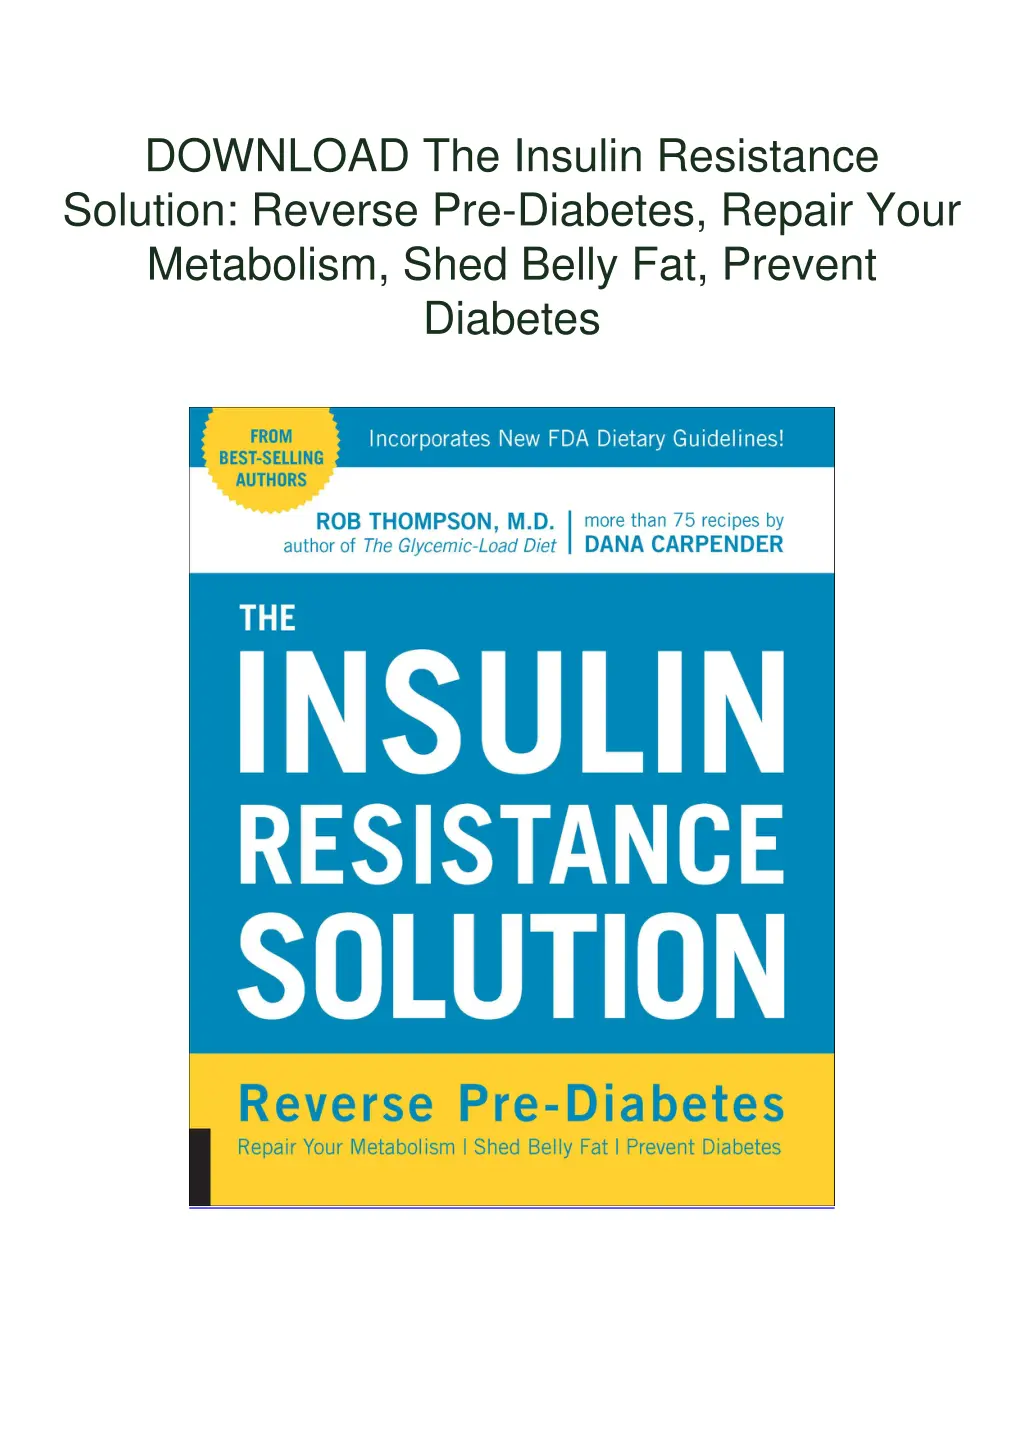 download the insulin resistance solution reverse